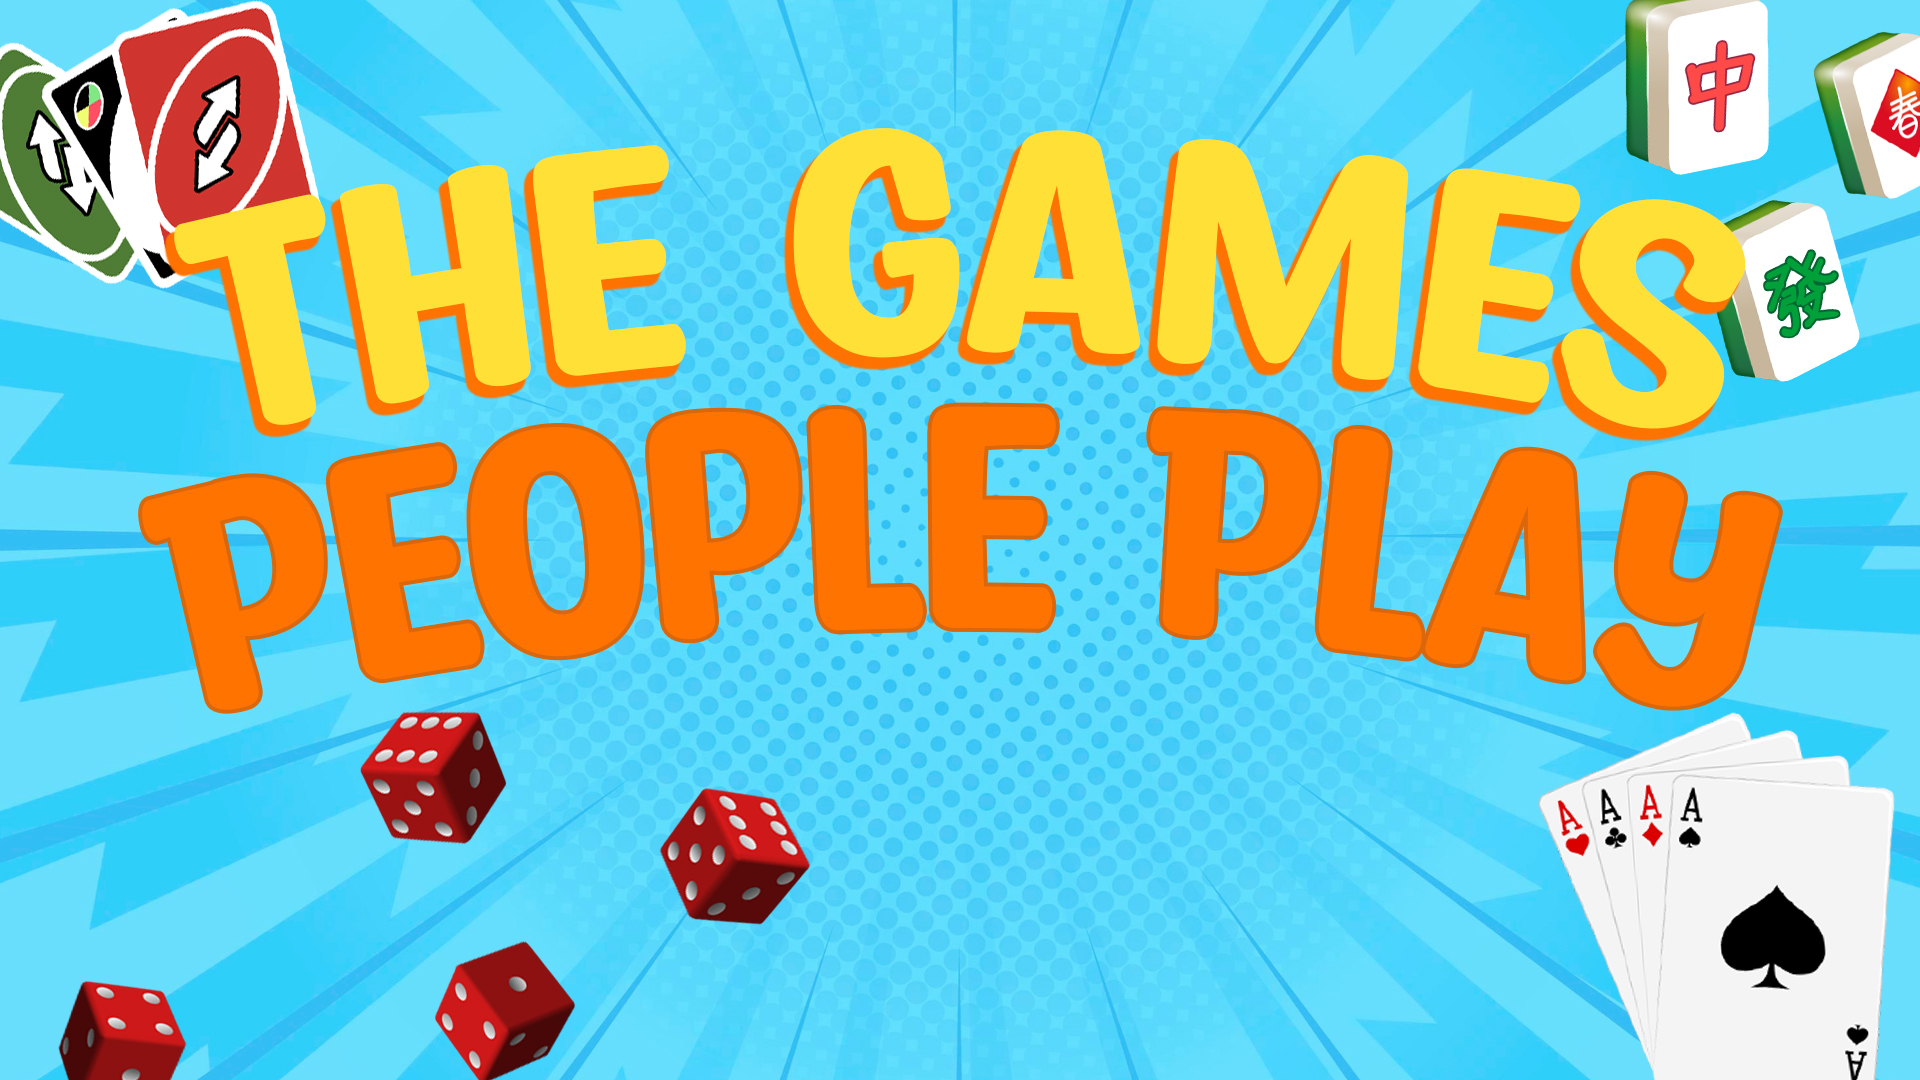 Image reads "The Games People Play" against a blue background. Cards, dice, and mahjong pieces are scattered among the image.